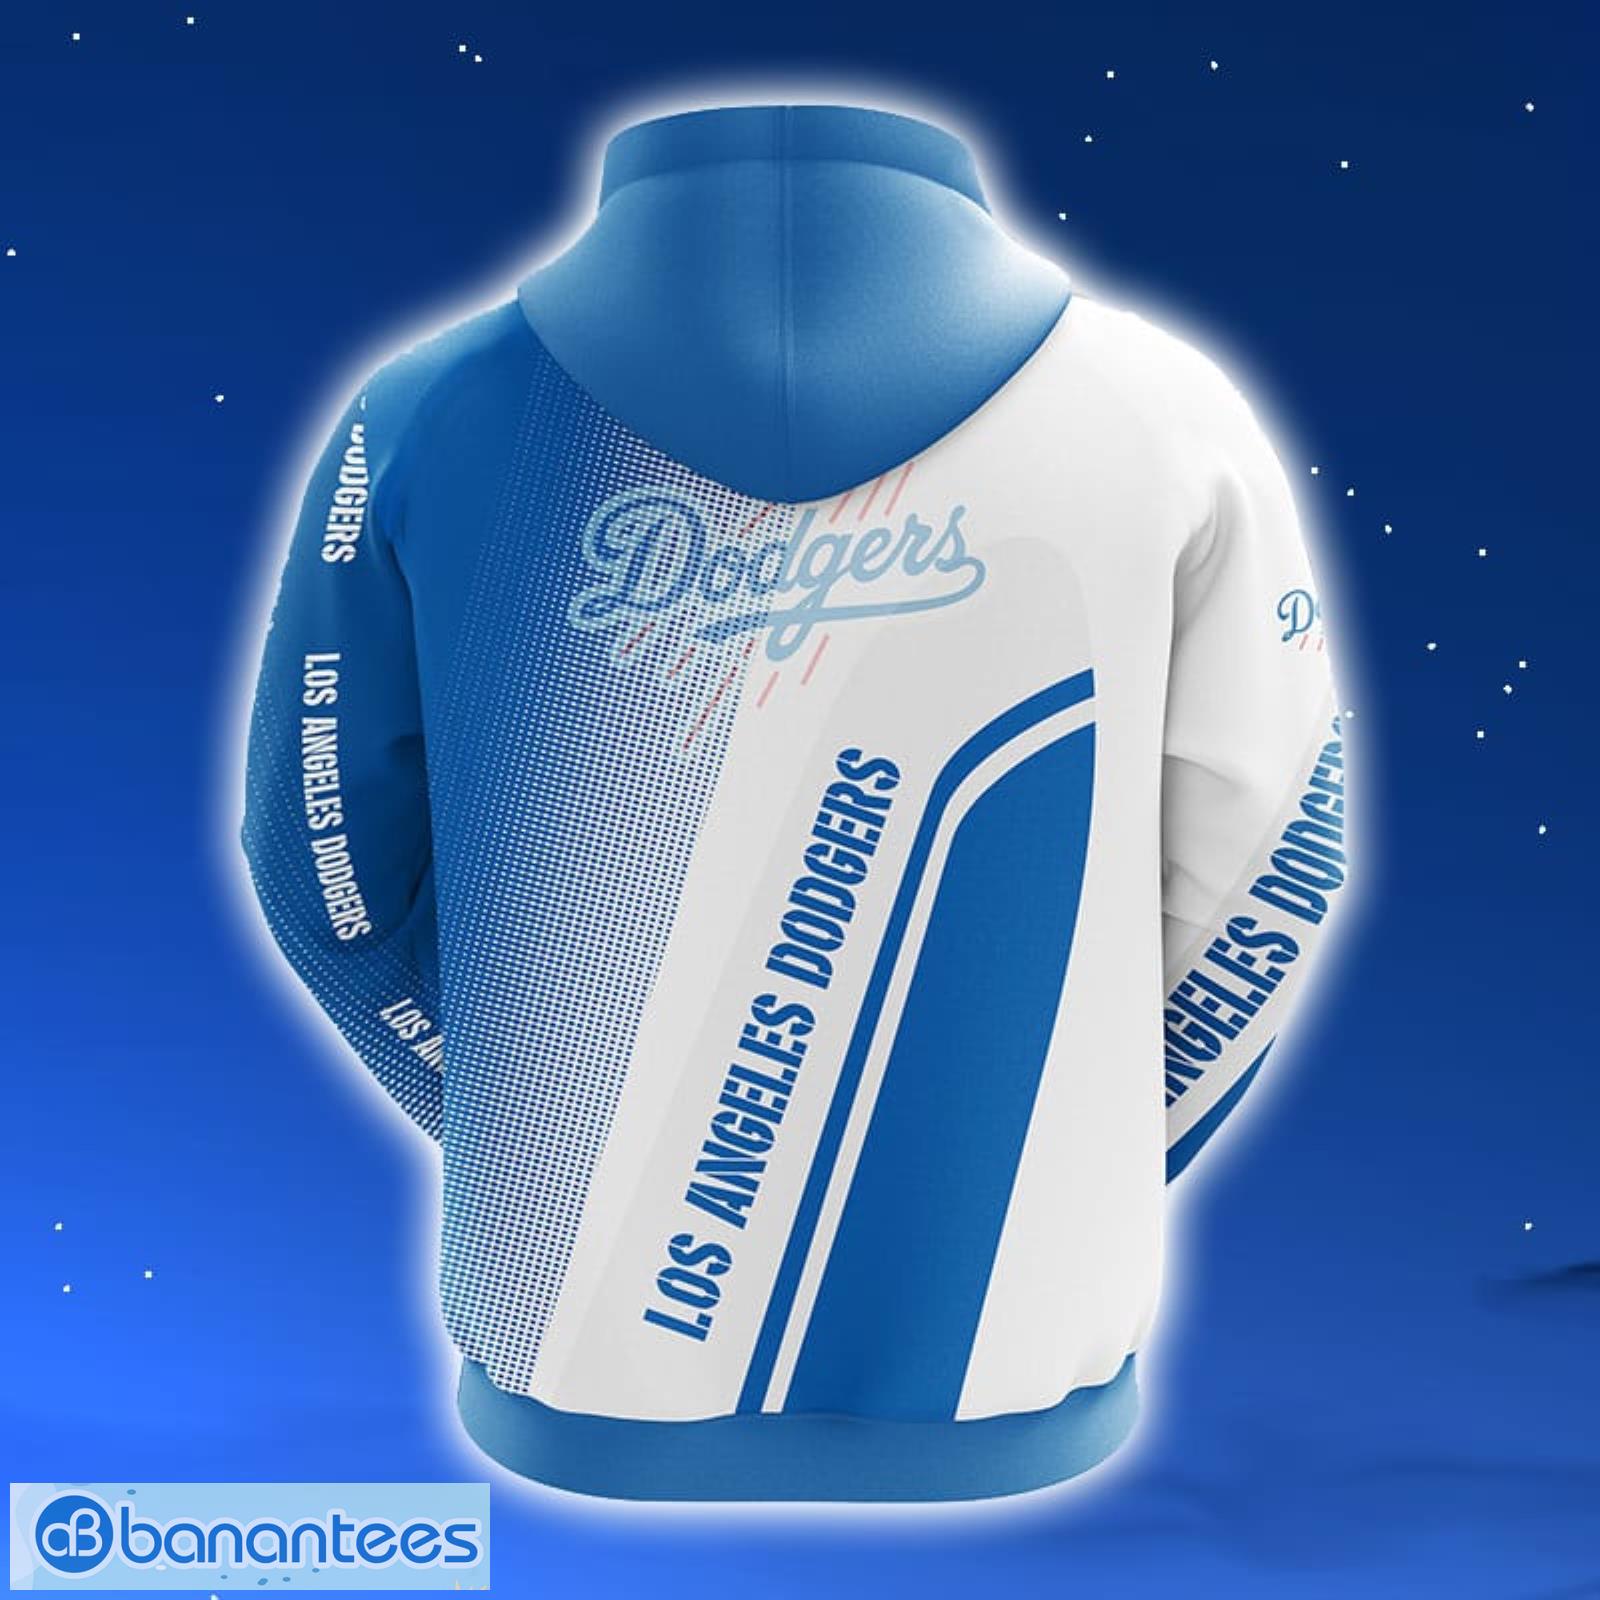 MLB Los Angeles Dodgers White 3D Hoodies Printed Zipper For Men Woman  Dodgers Fans - T-shirts Low Price